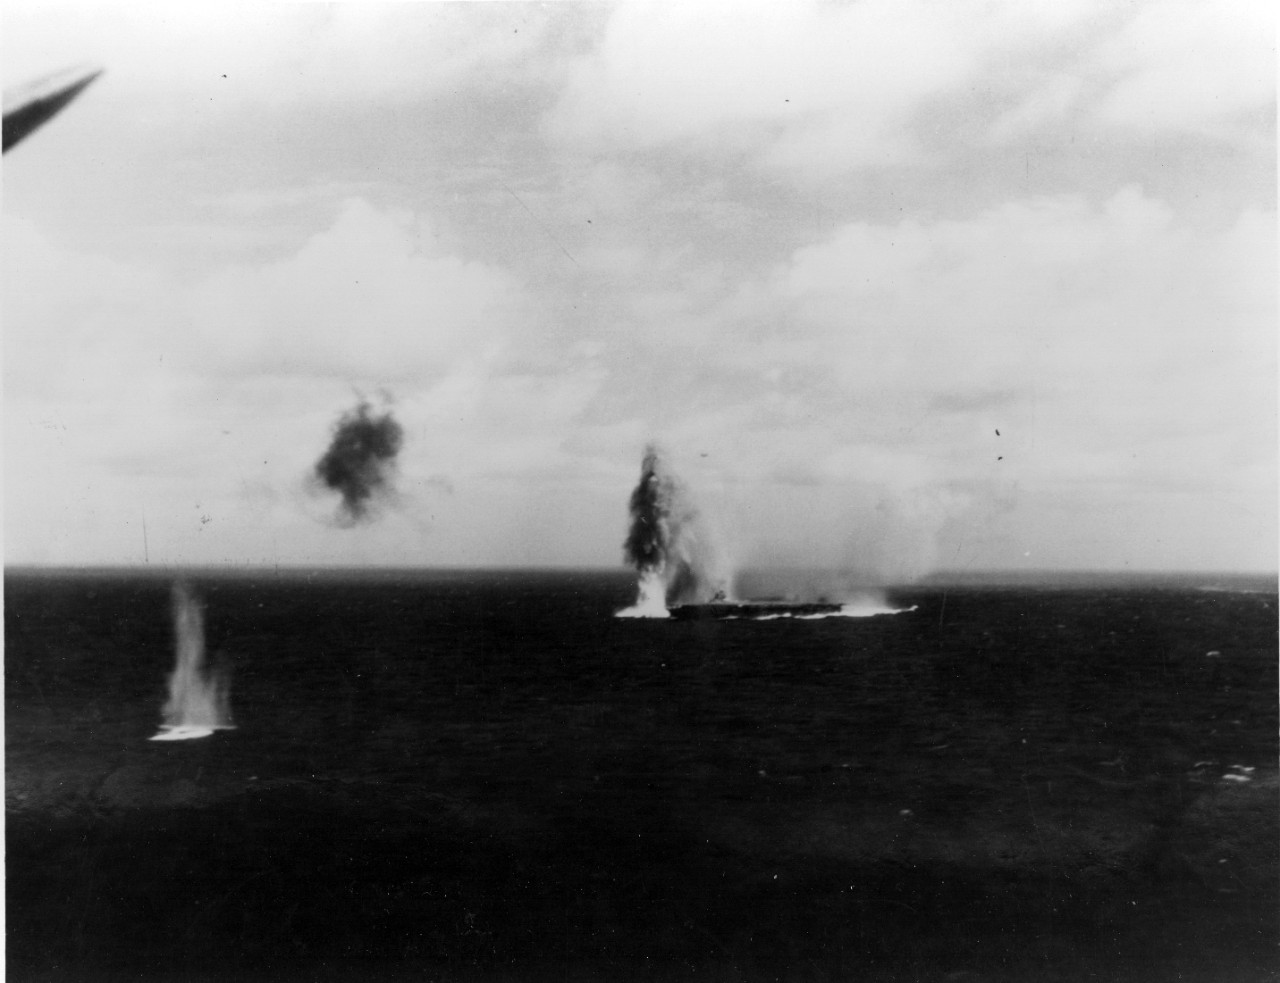 Photo #: 80-G-17422  Battle of Coral Sea, May 1942